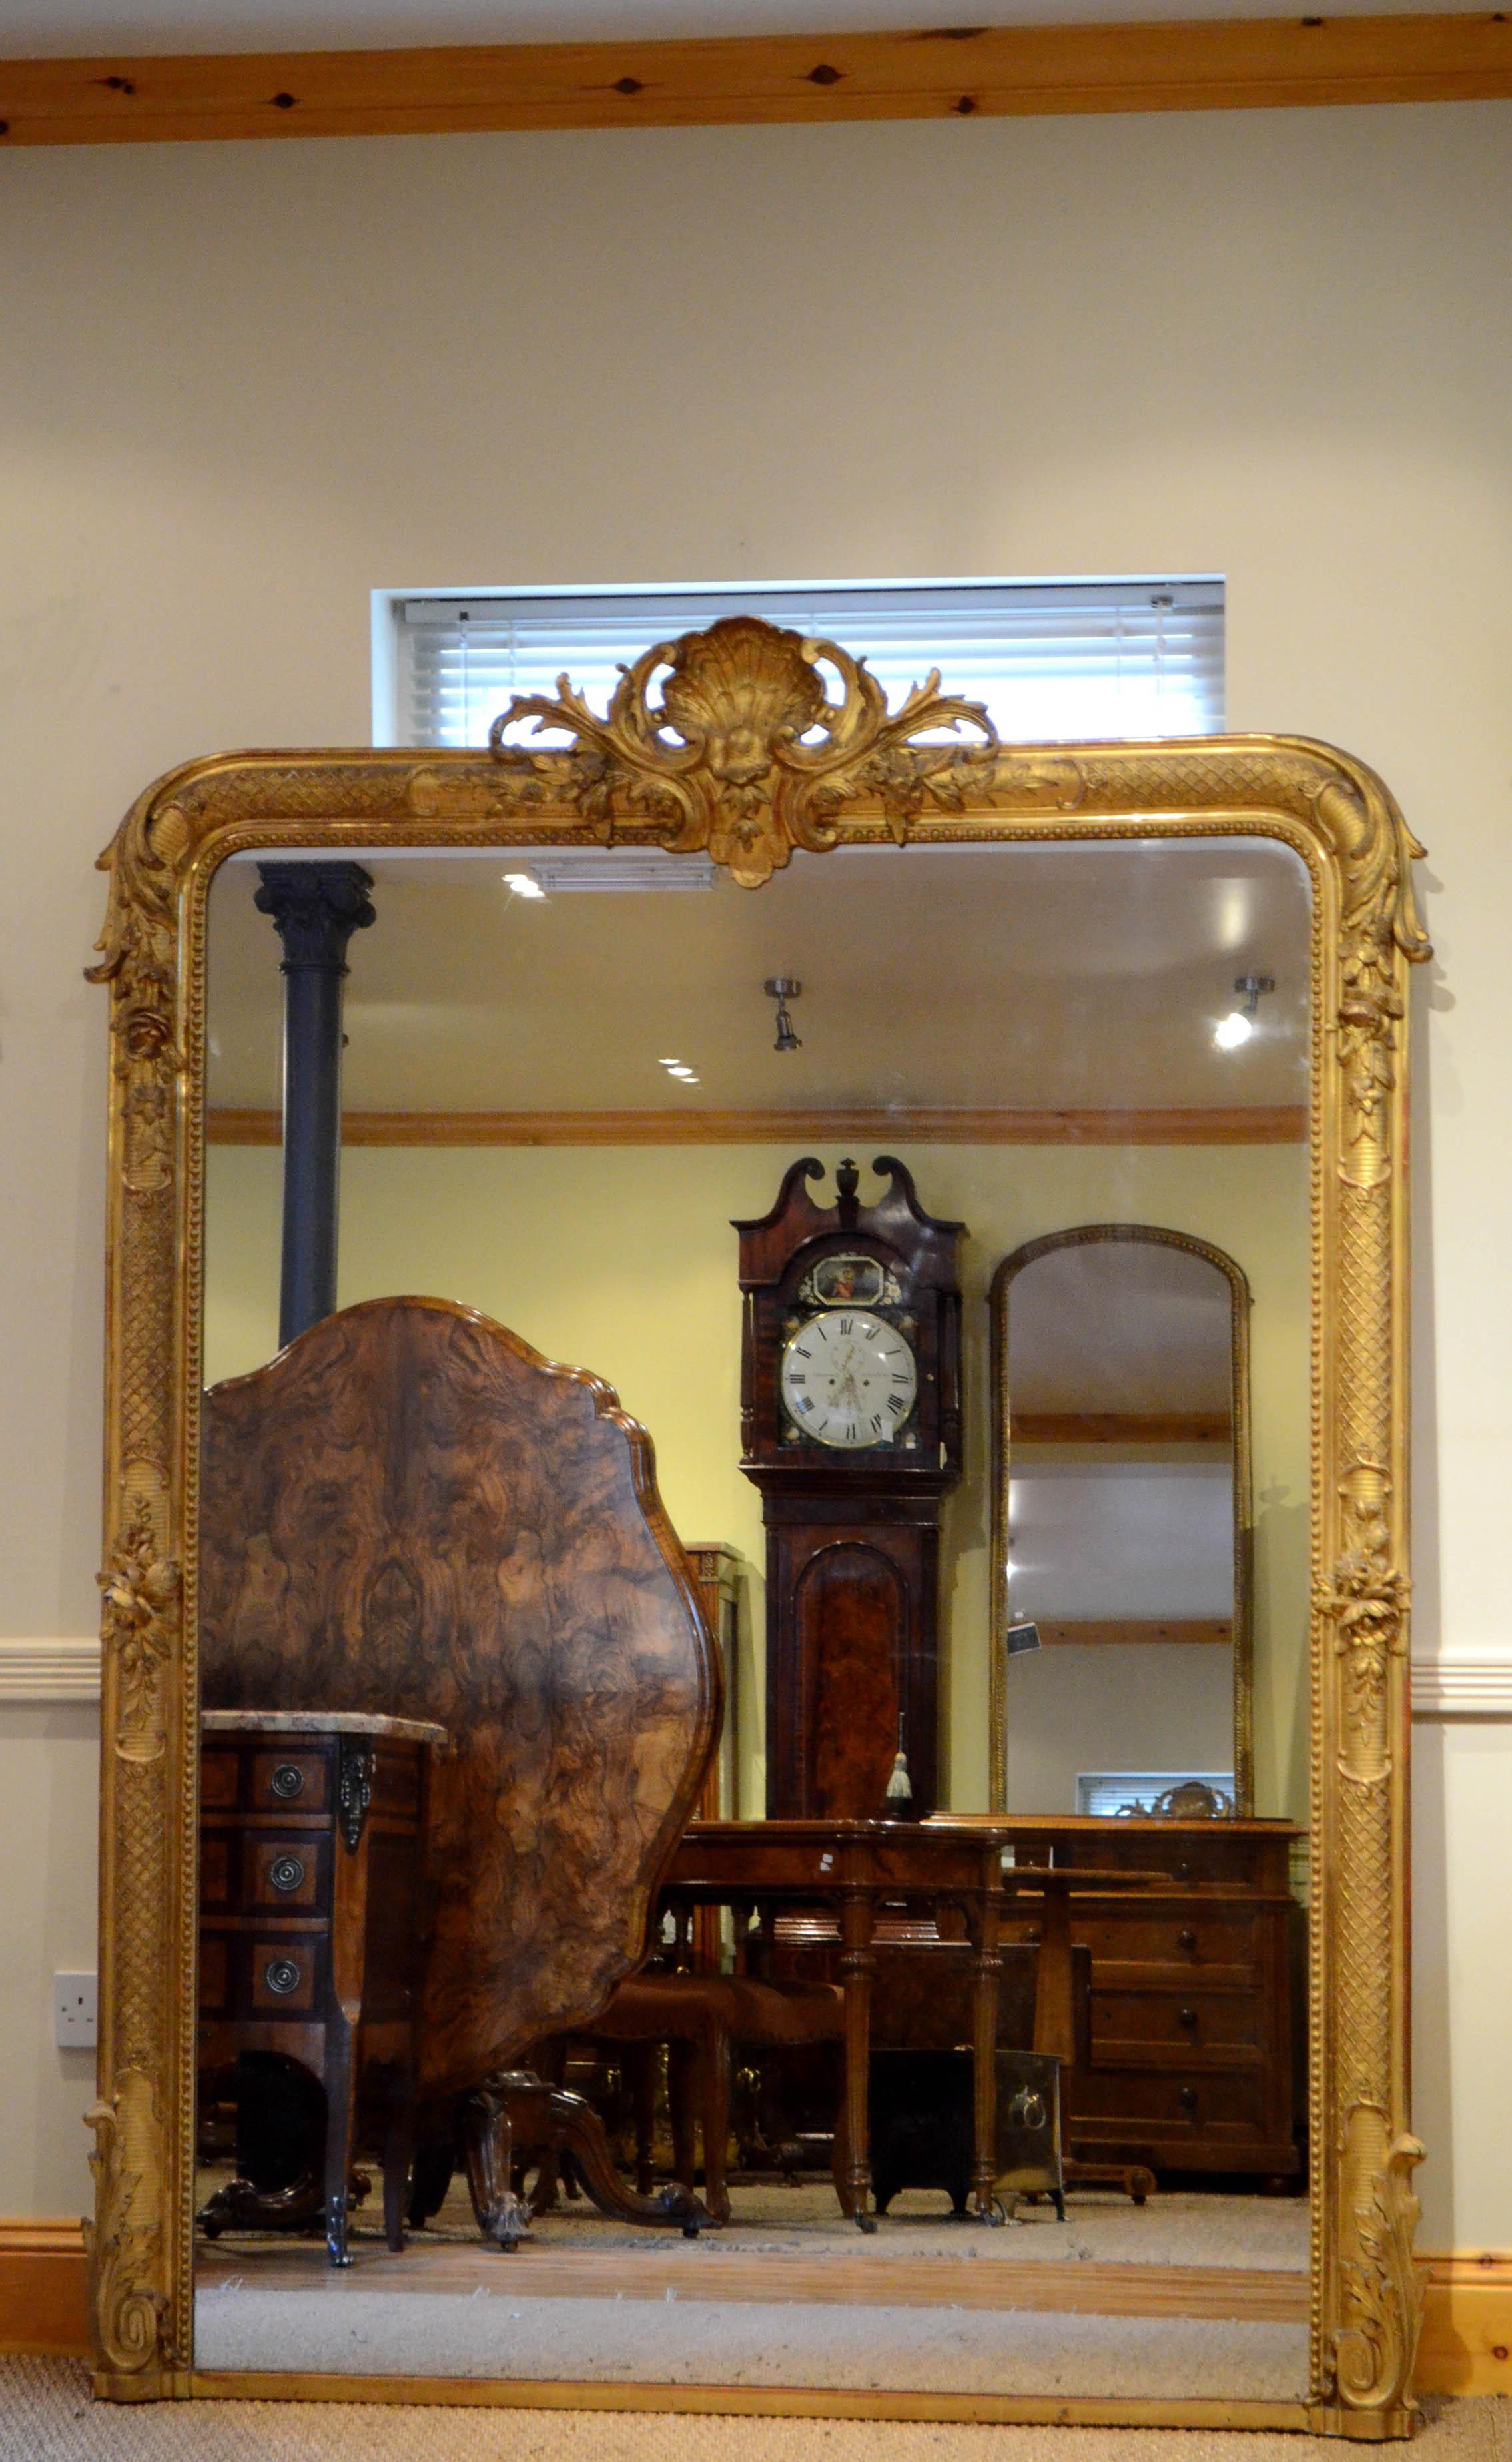 Sn4644, exceptional 19th century mirror of versatile form (can be hung on the wall or stood on the floor), having original glass with some foxing in flower and shell carved gilded frame. This antique mirror retains its original glass, original gilt